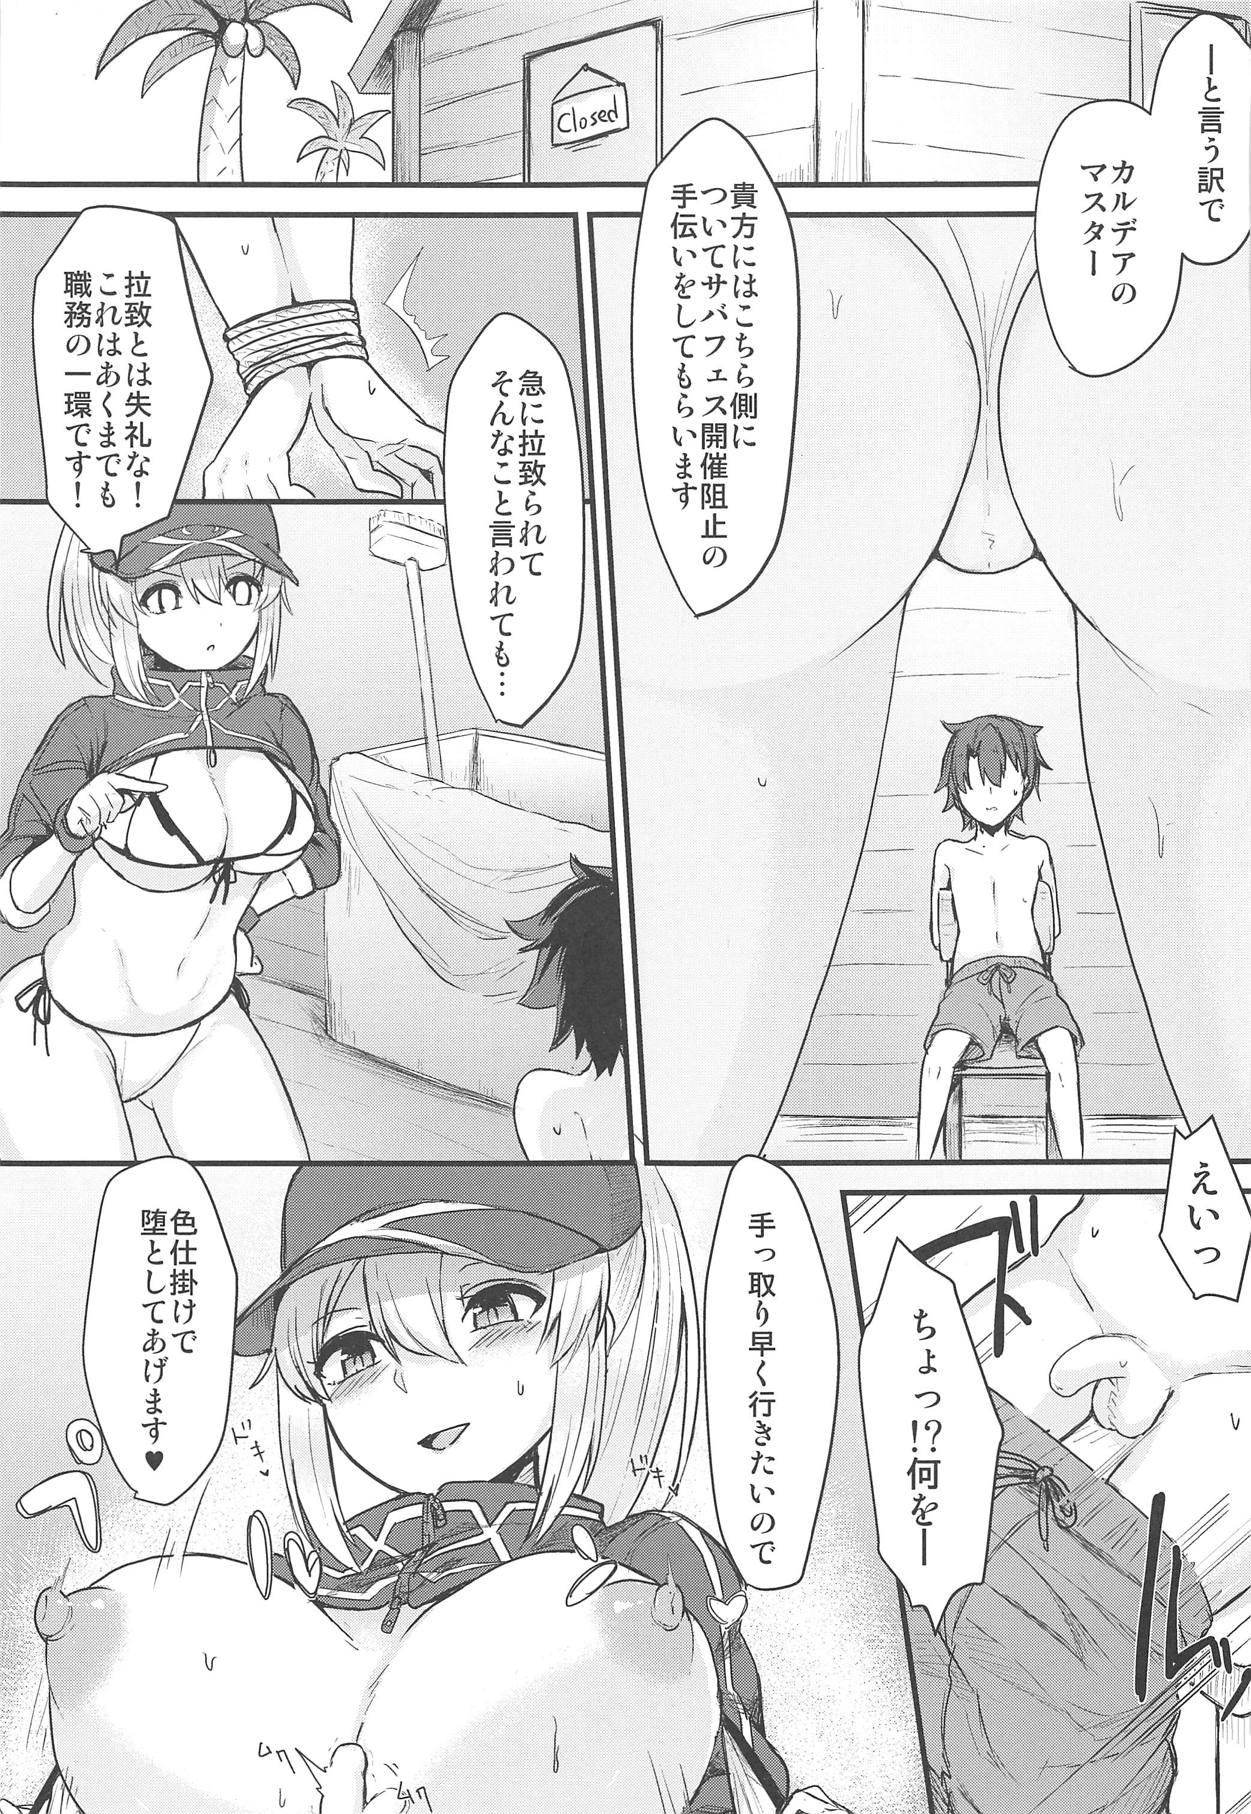 Eating Anes H - Fate grand order Shemales - Page 4